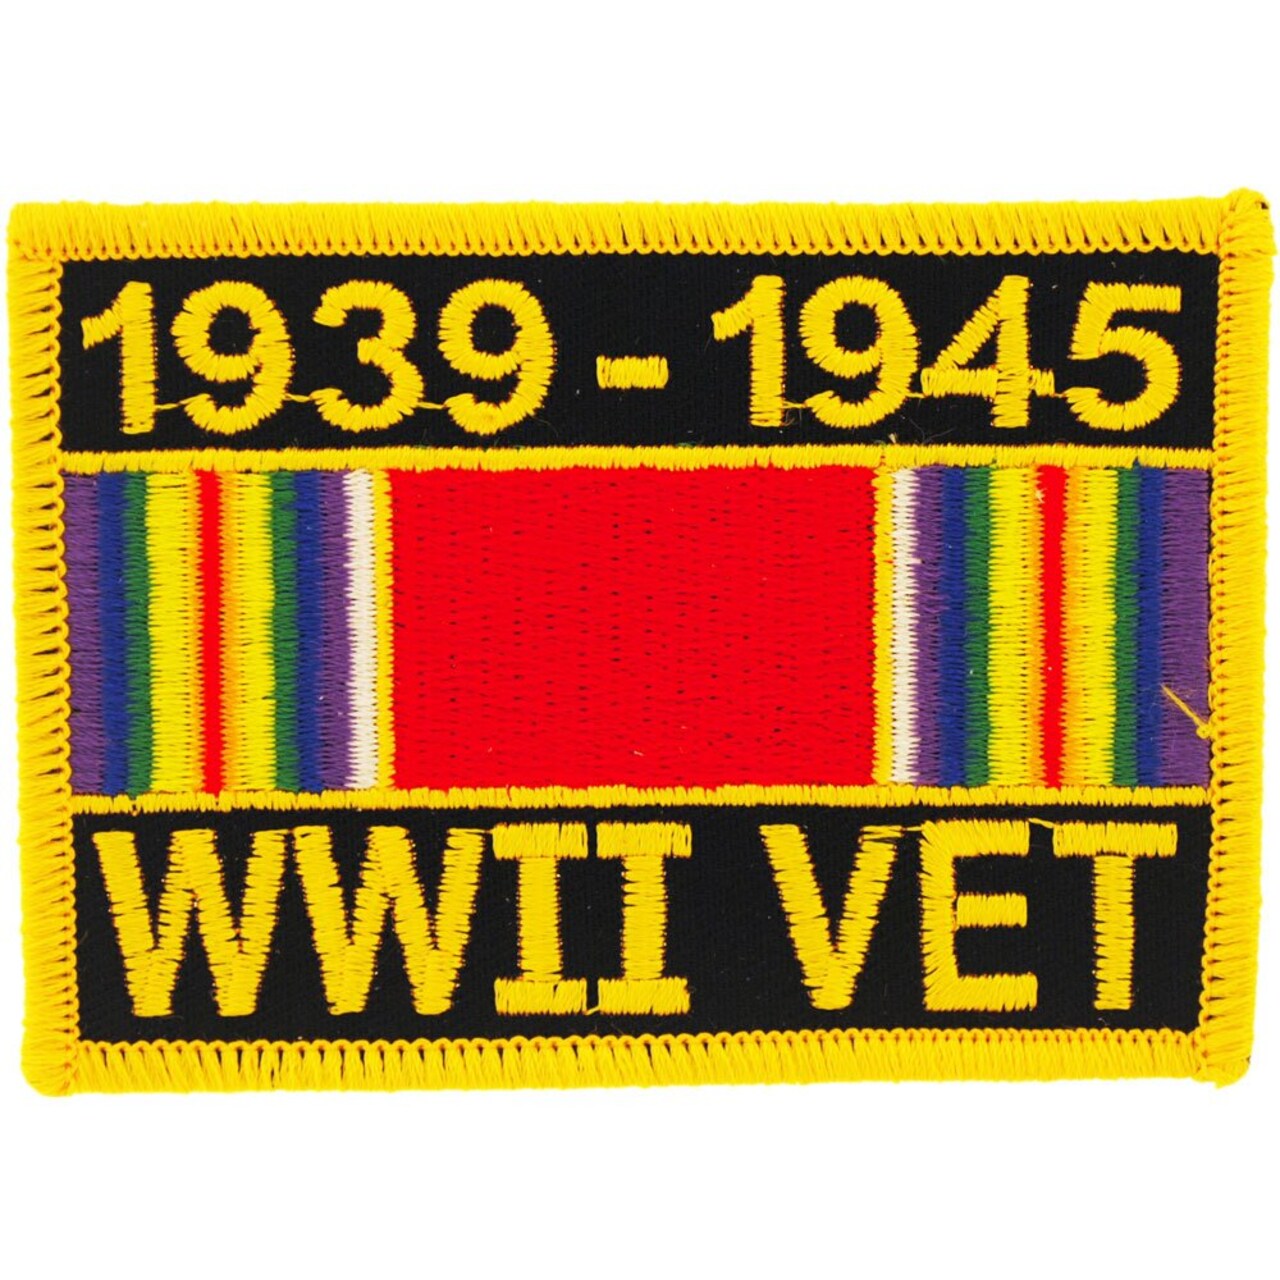 WWII Veteran Service Ribbon Patch 1939-1945 Military Collectibles